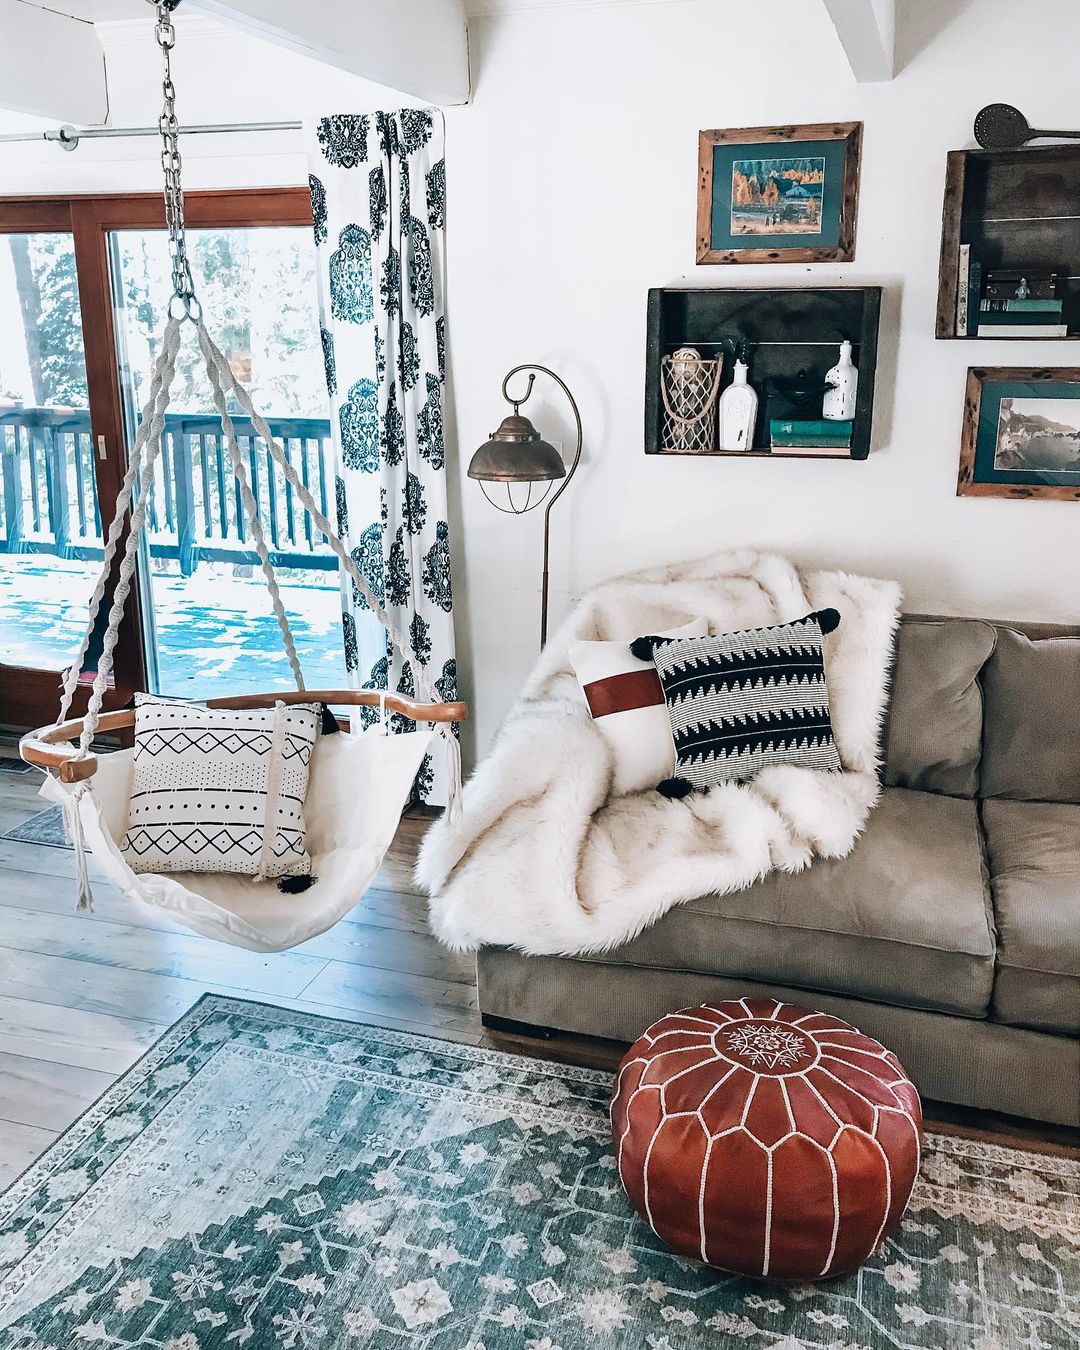 Living room with cool touches, including a dark teal rug, teal and navy-patterned curtains, and soft grey sofa, beside a hanging chair made of wood, white canvas material. Photo by Instagram user @shoppingwith.hannah.